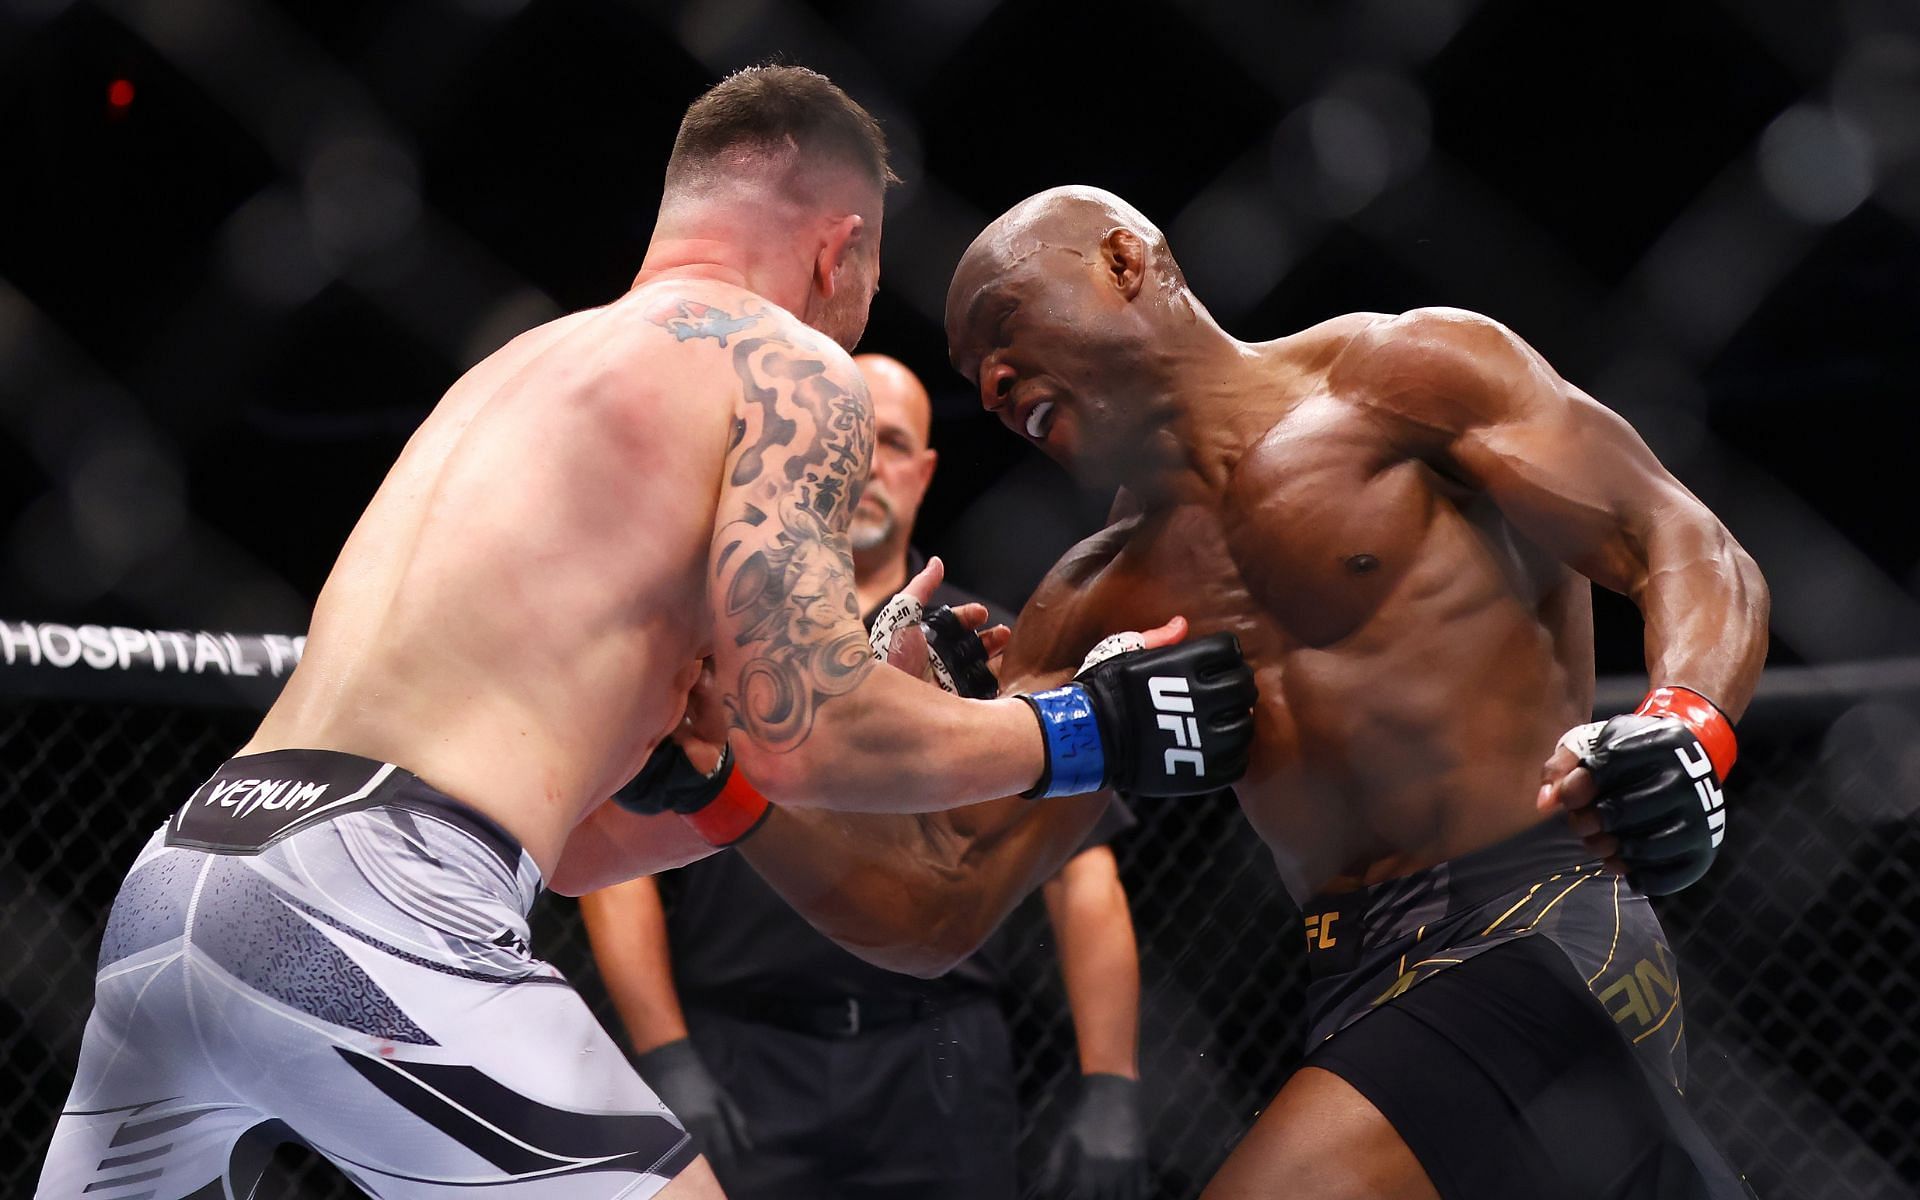 UFC welterweight champion Kamaru Usman (right) in action against No.1 contender Colby Covington (left)